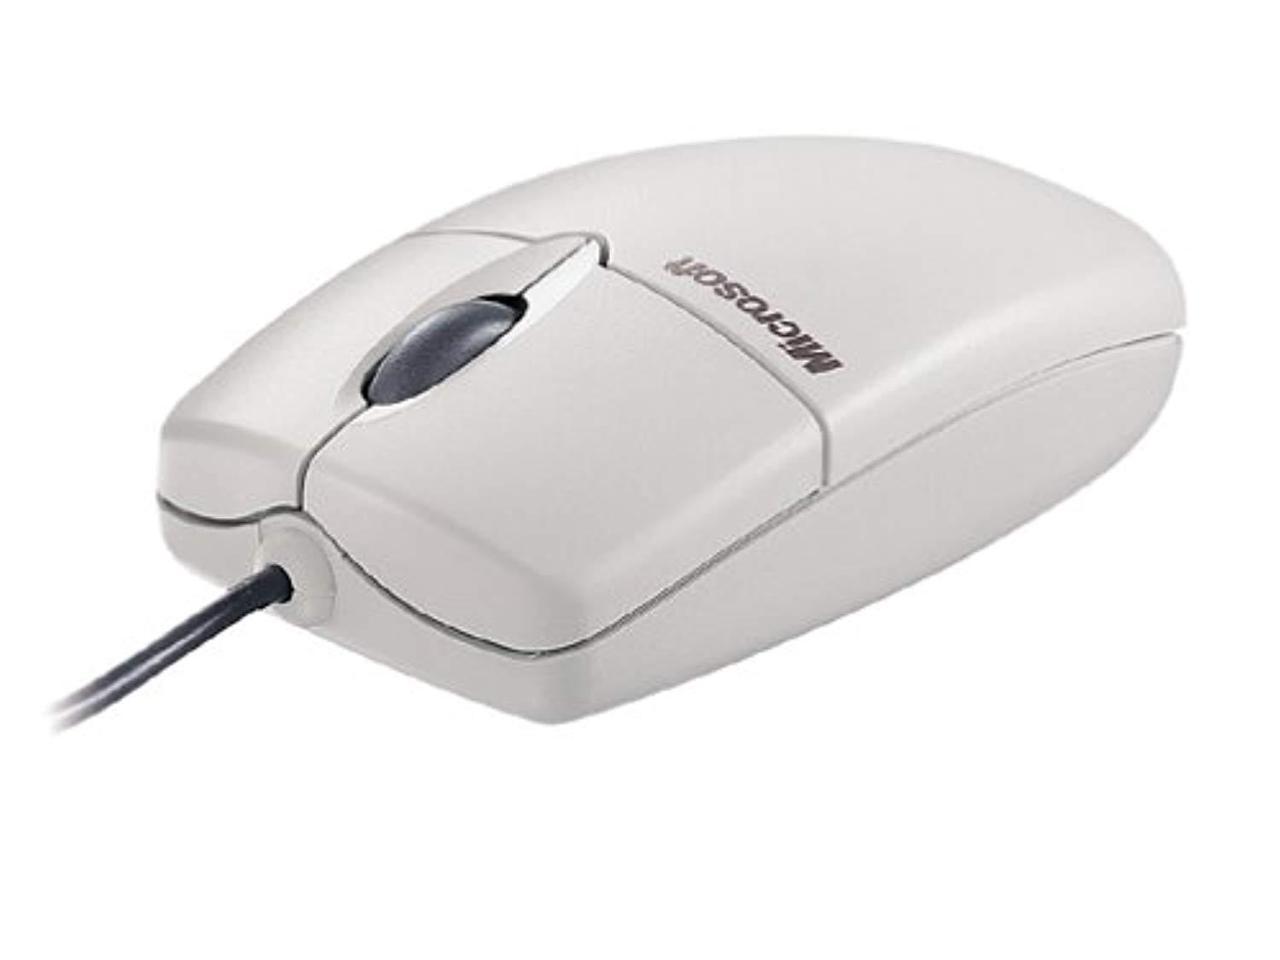 Mouse rating. Мышь Microsoft Wheel Optical Mouse 3000 Periwinkle Blue-Grey USB+PS/2. Мышь Mitsumi Scroll Wheel Mouse White PS/2. Microsoft 1.0 Mouse. Мышка от 1 мака.